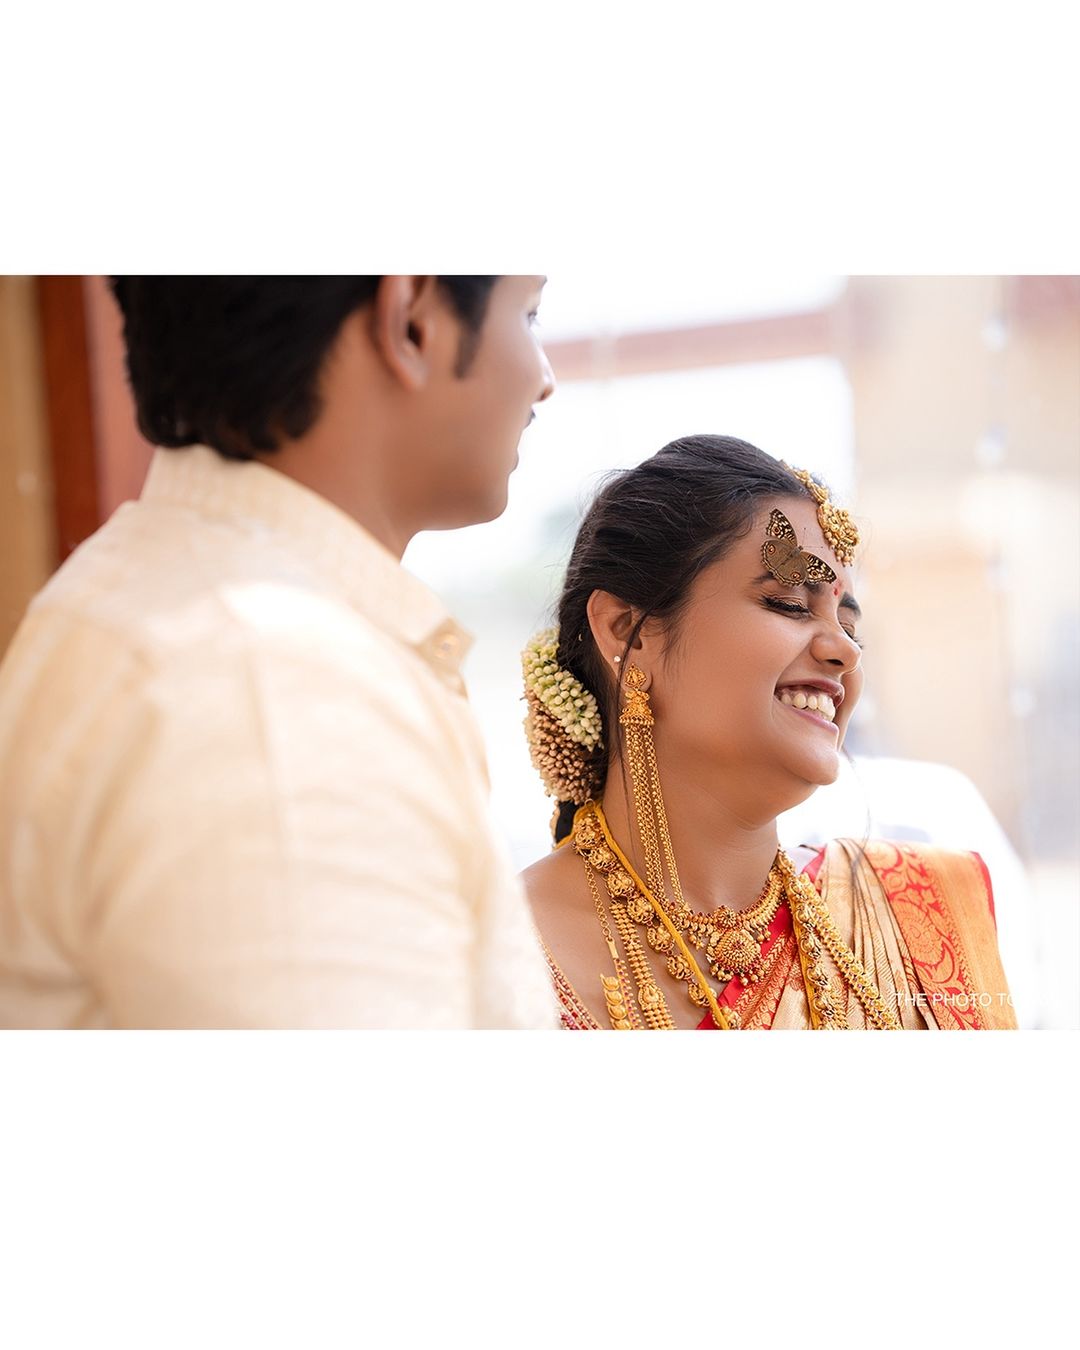 Radiant Bride and Groom: A Stunning Coimbatore Wedding Captured by PhotoToday Photography